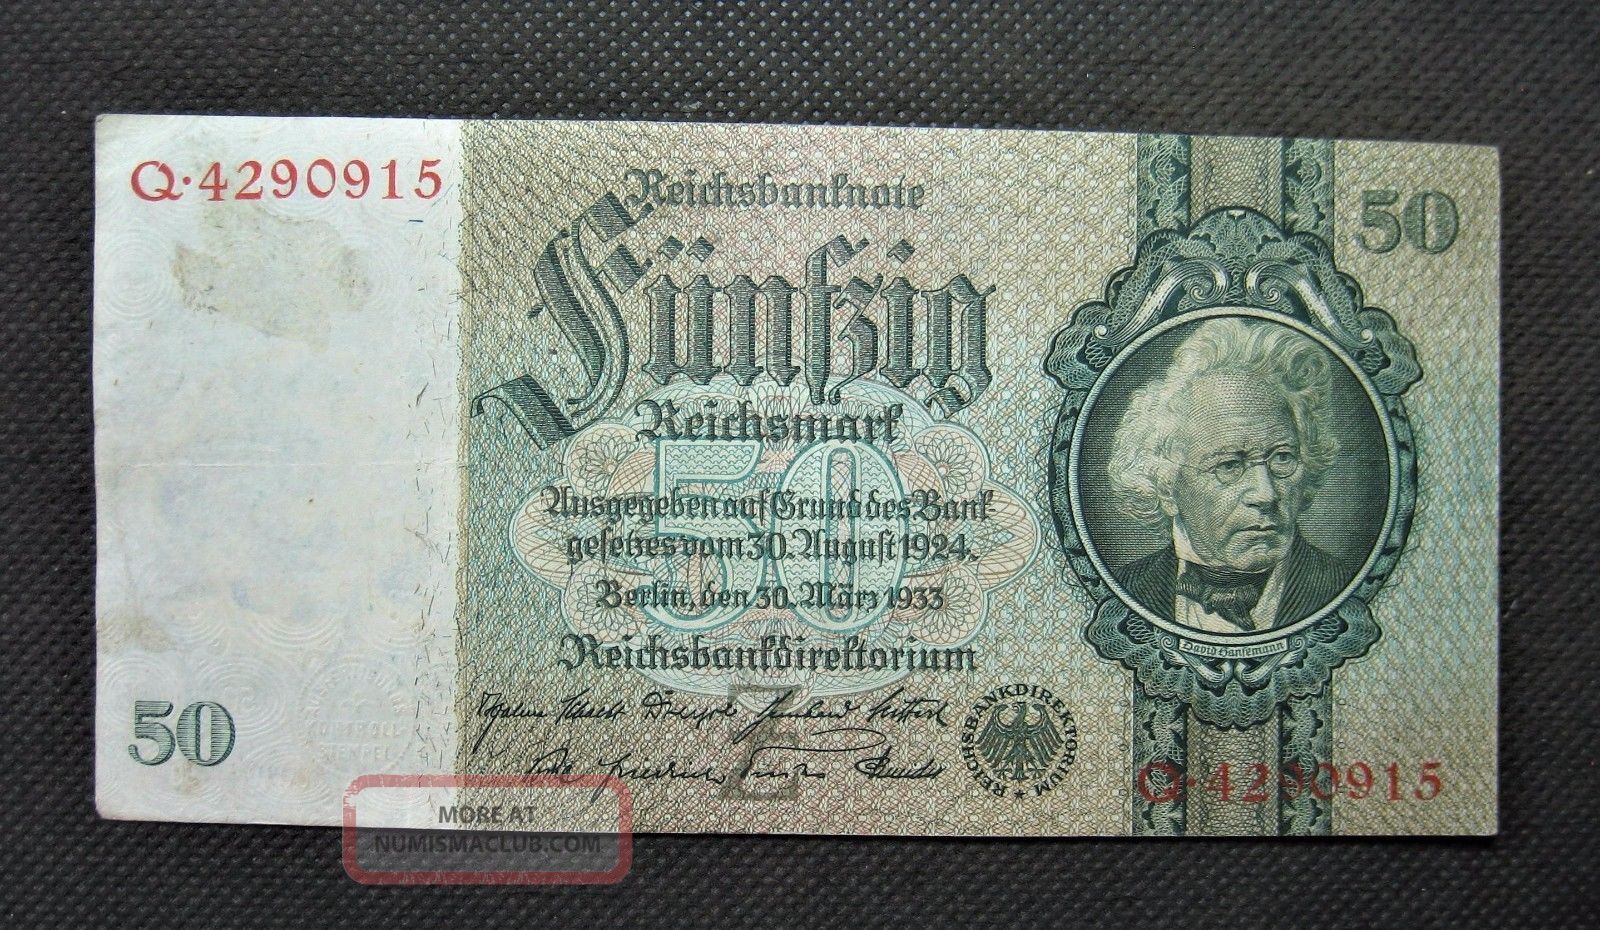 Old Bank Note Of Nazi Germany 50 Reichsmark 1933 Third Reich Serial No Q4290915 Europe photo